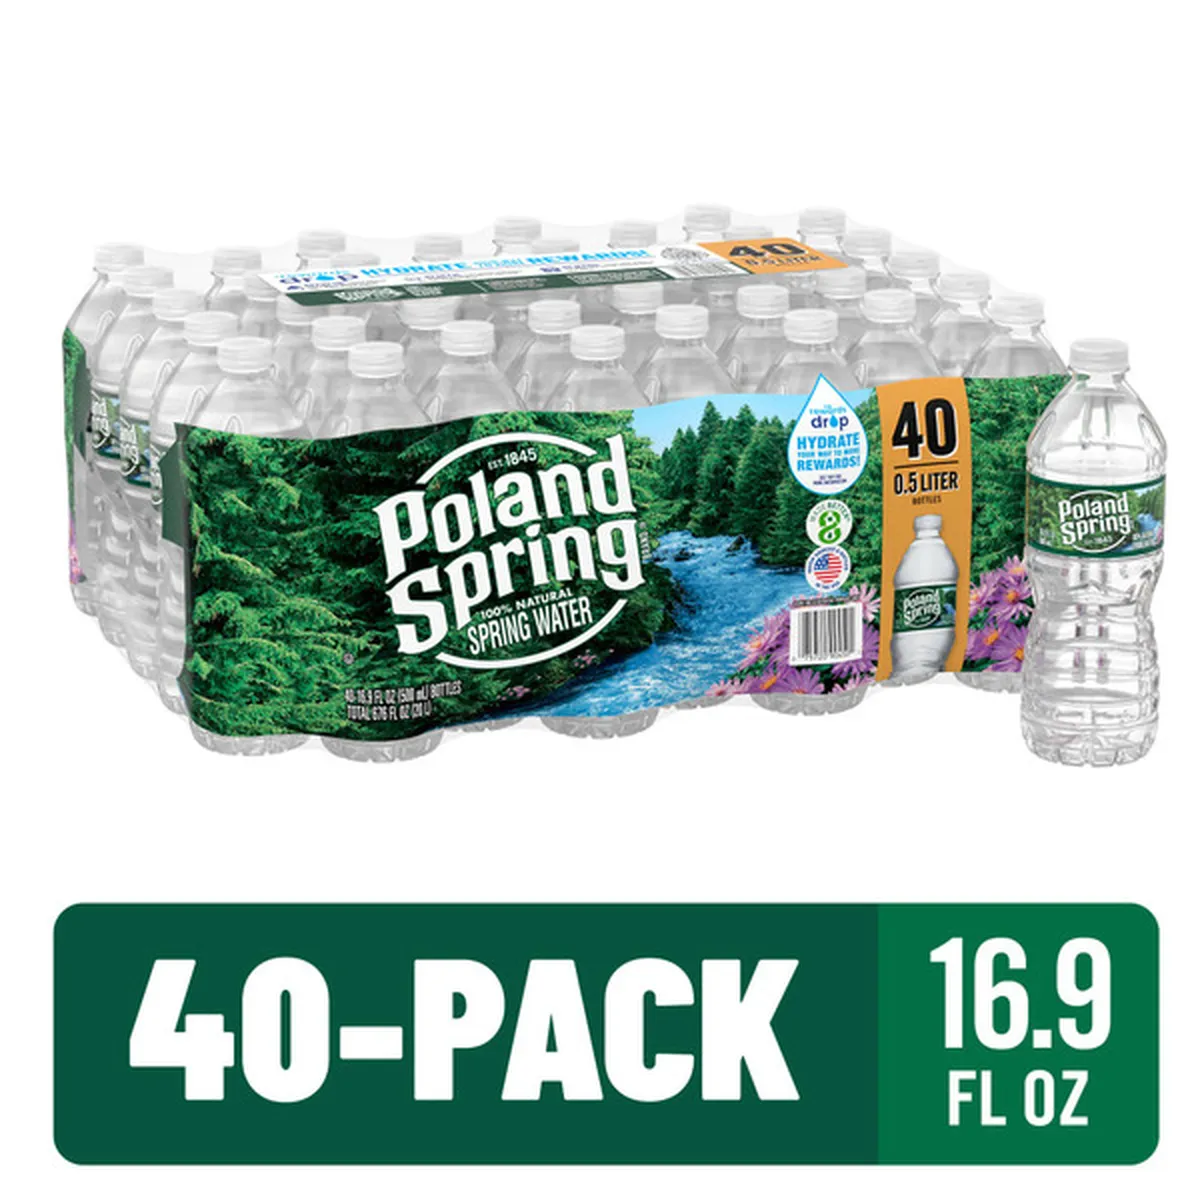 8 Ounce Bottled Water  Ice Mountain® Brand 100% Natural Spring Water